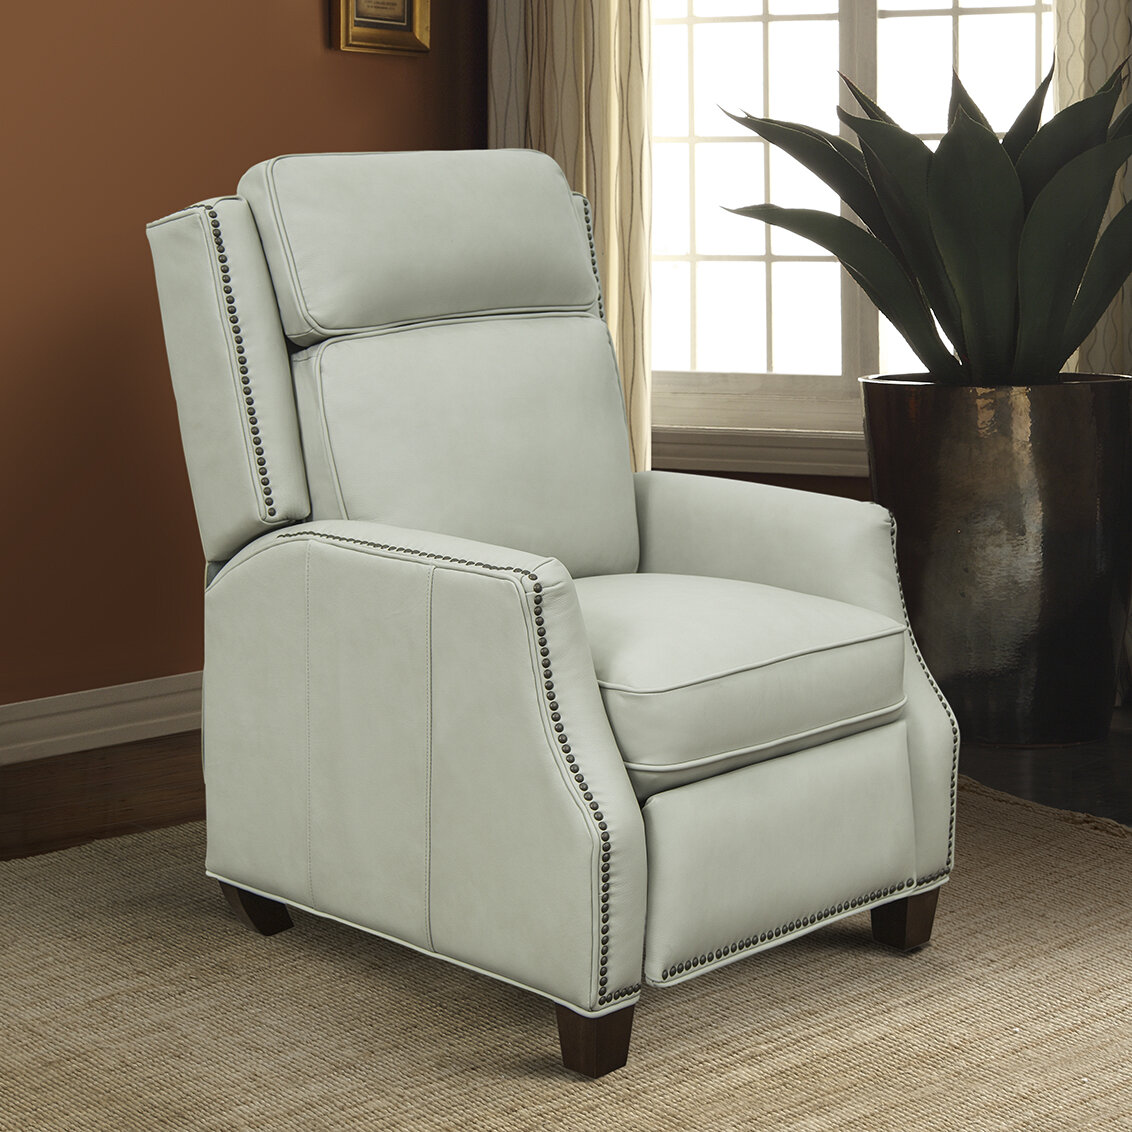 Carol Wright Gifts Medallion Quilted Furniture Covers 78.5 L x 65 W Color Gray Size Recliner Gray Size Recliner 78.5 L x 65 W